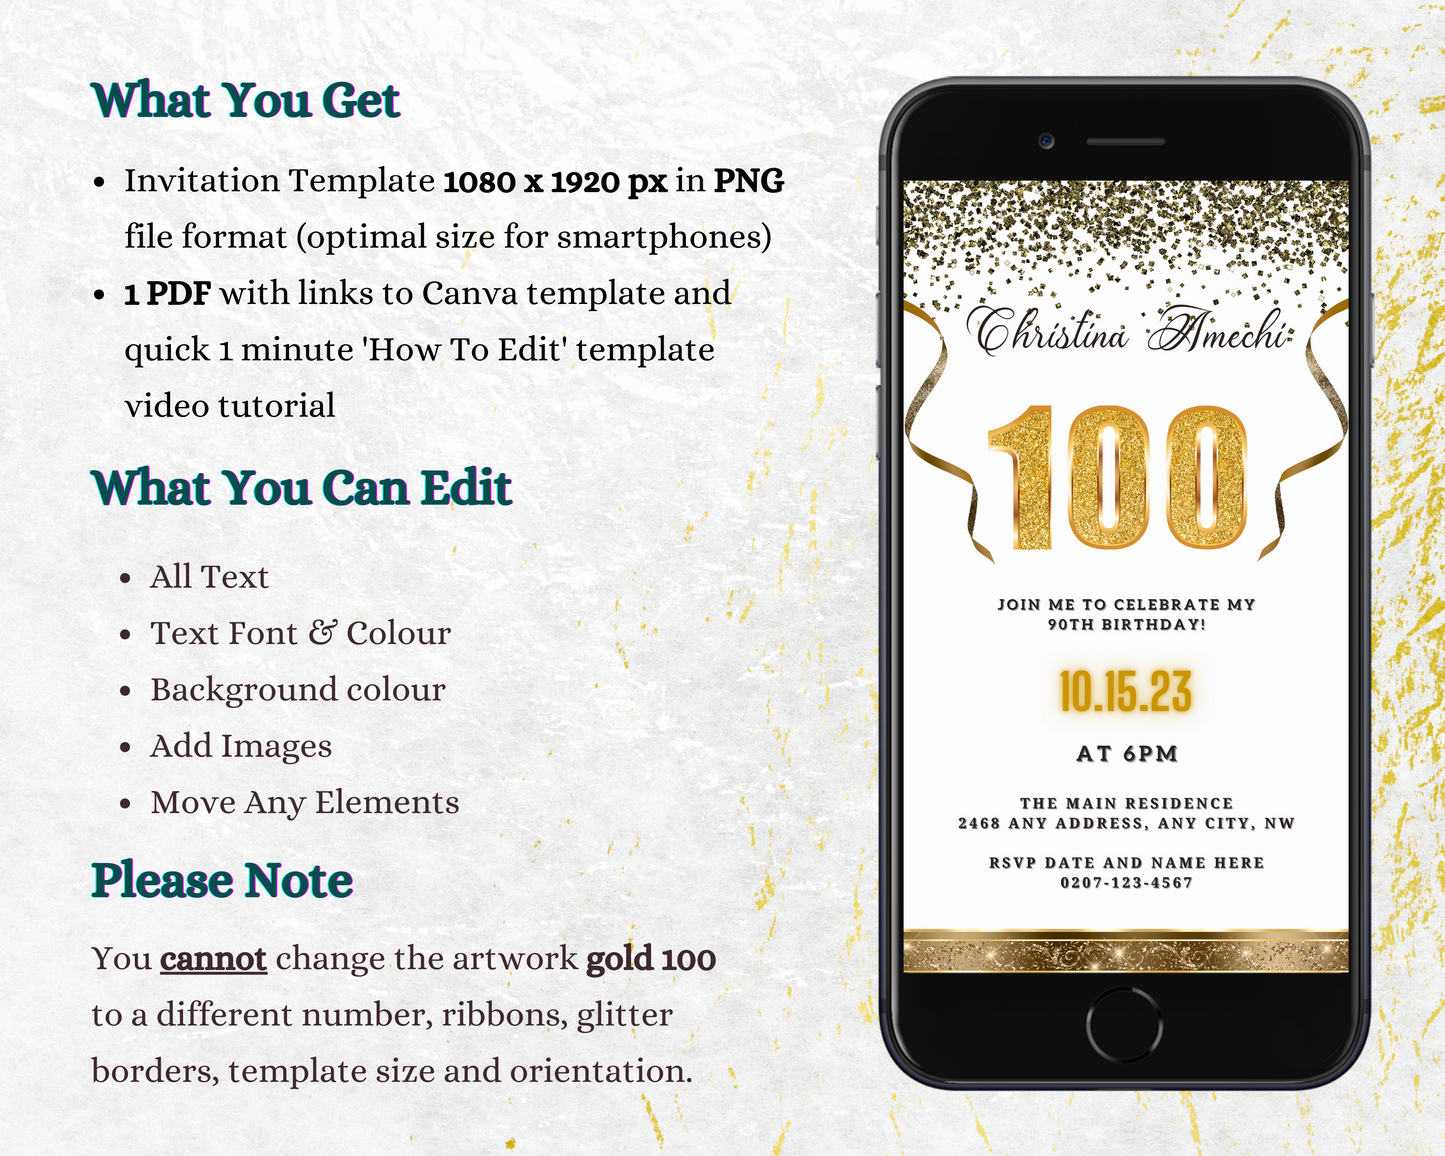 Customizable digital invite for a 100th birthday featuring white and gold confetti on a mobile phone screen. Editable via Canva for easy personalization.